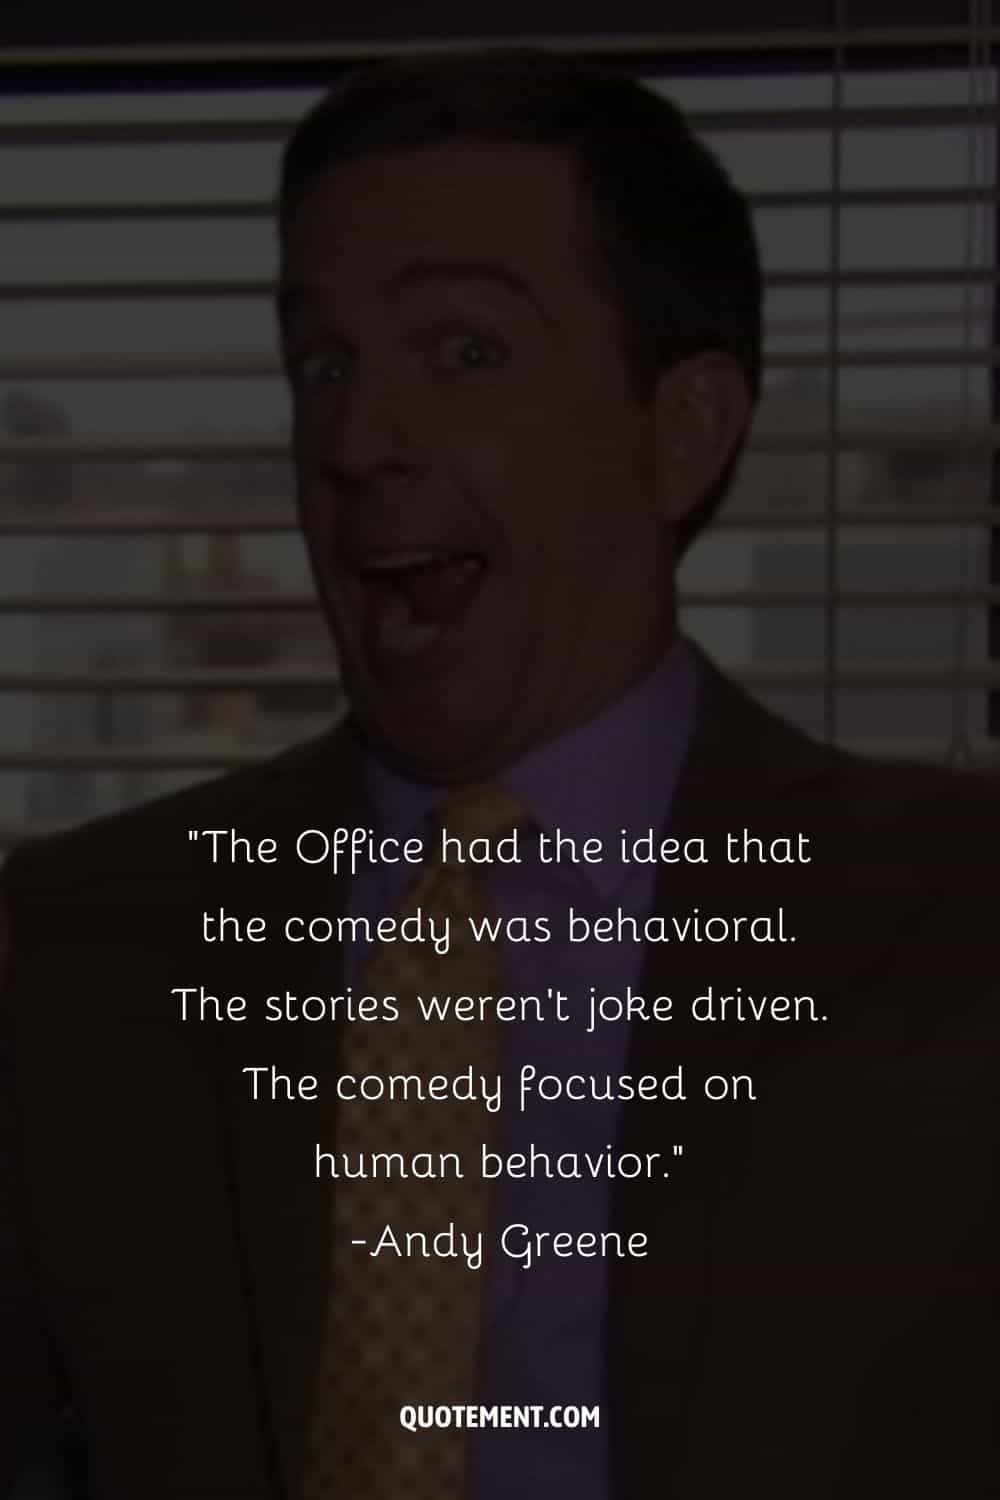 The Office had the idea that the comedy was behavioral